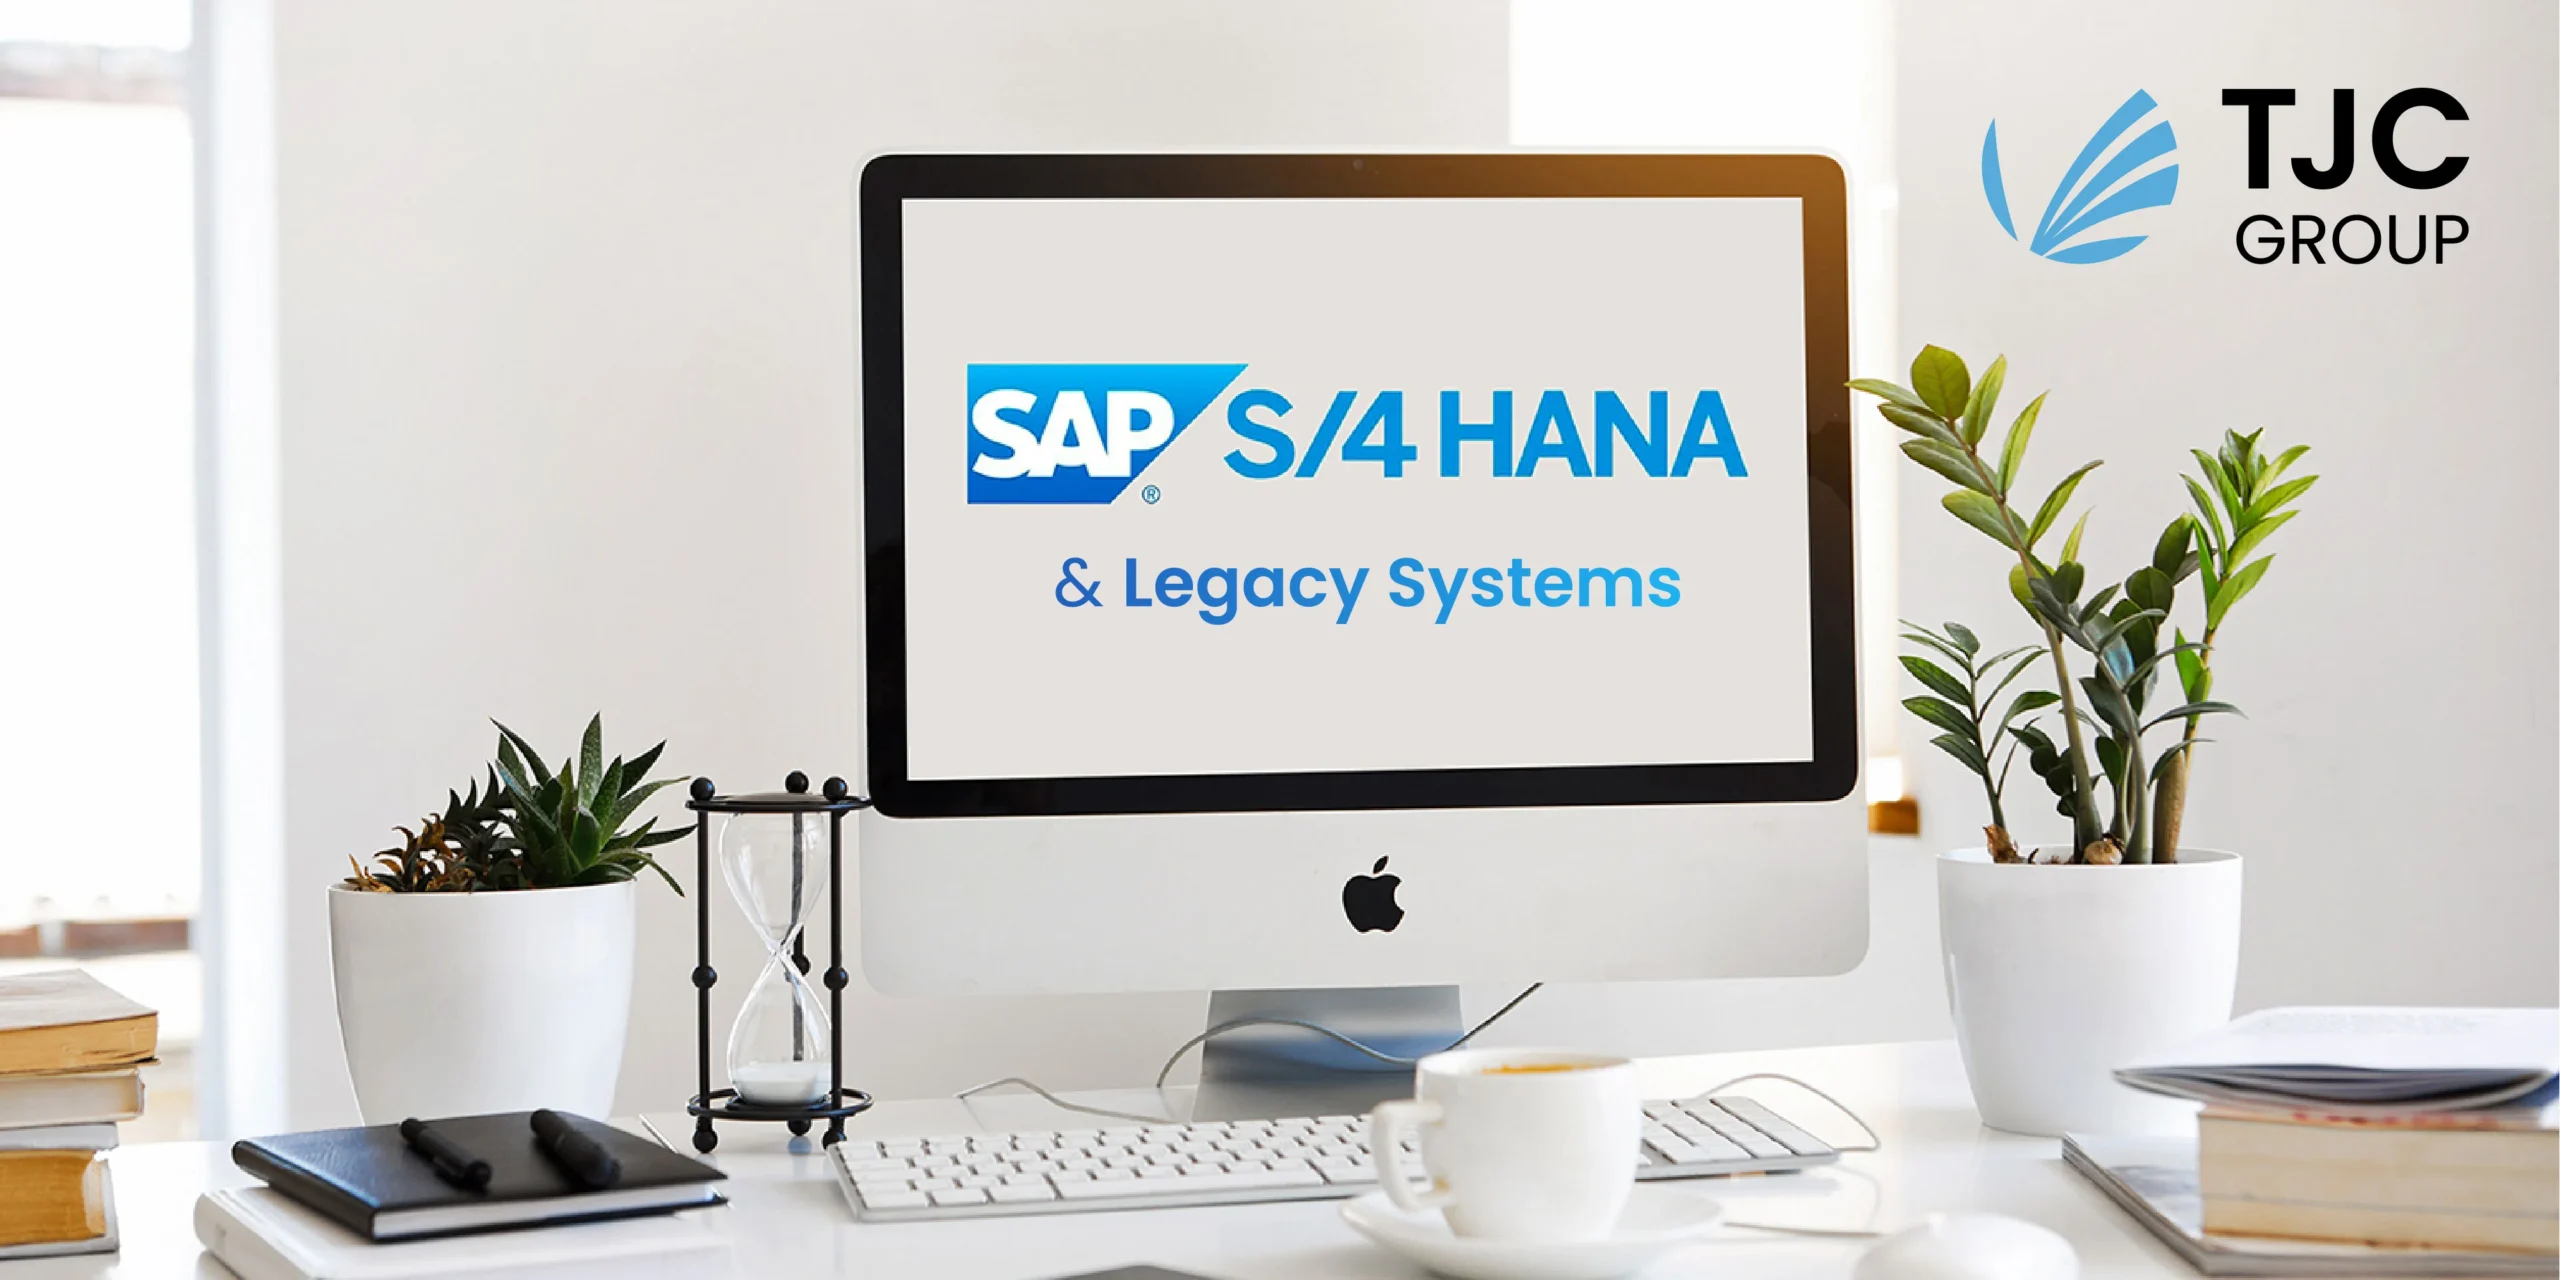 SAP S/4HANA in the content of legacy systems decommissioning